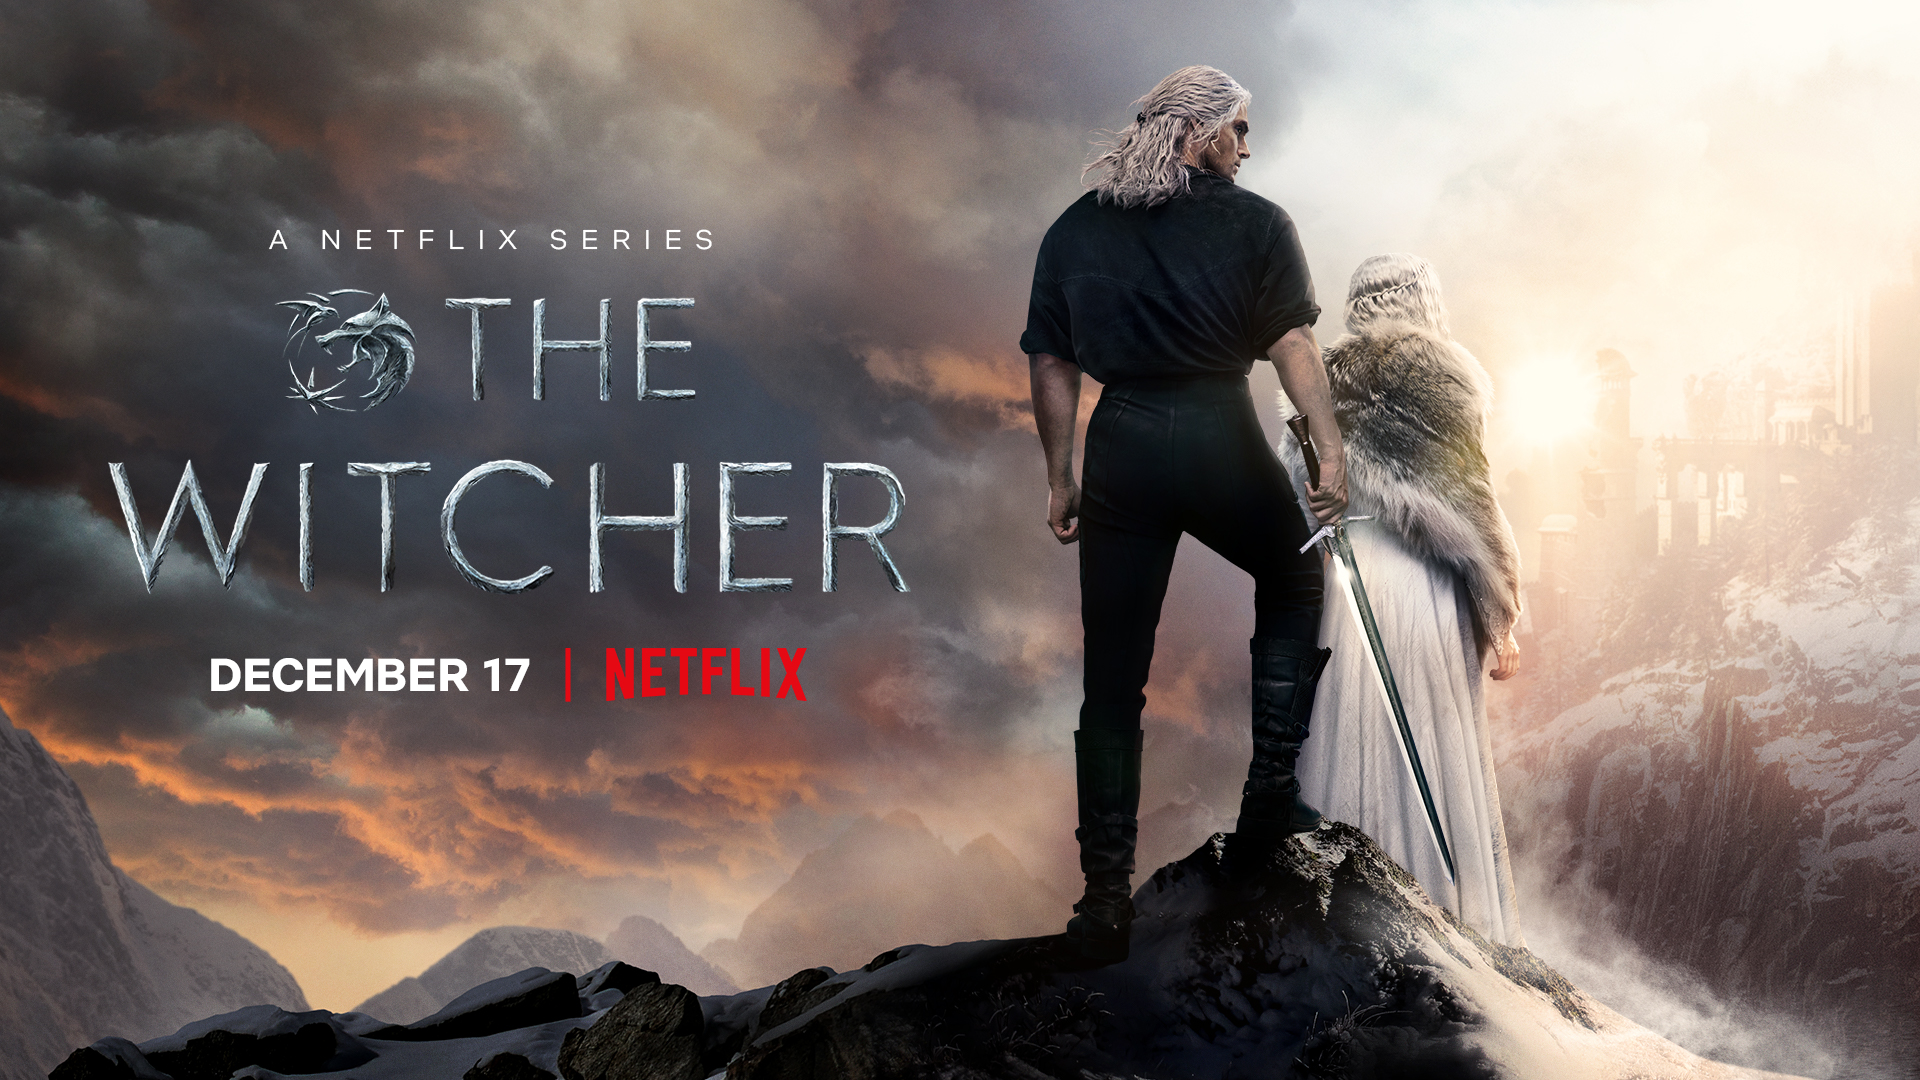 ‘The Witcher’ season 2 will hit Netflix on December 17th